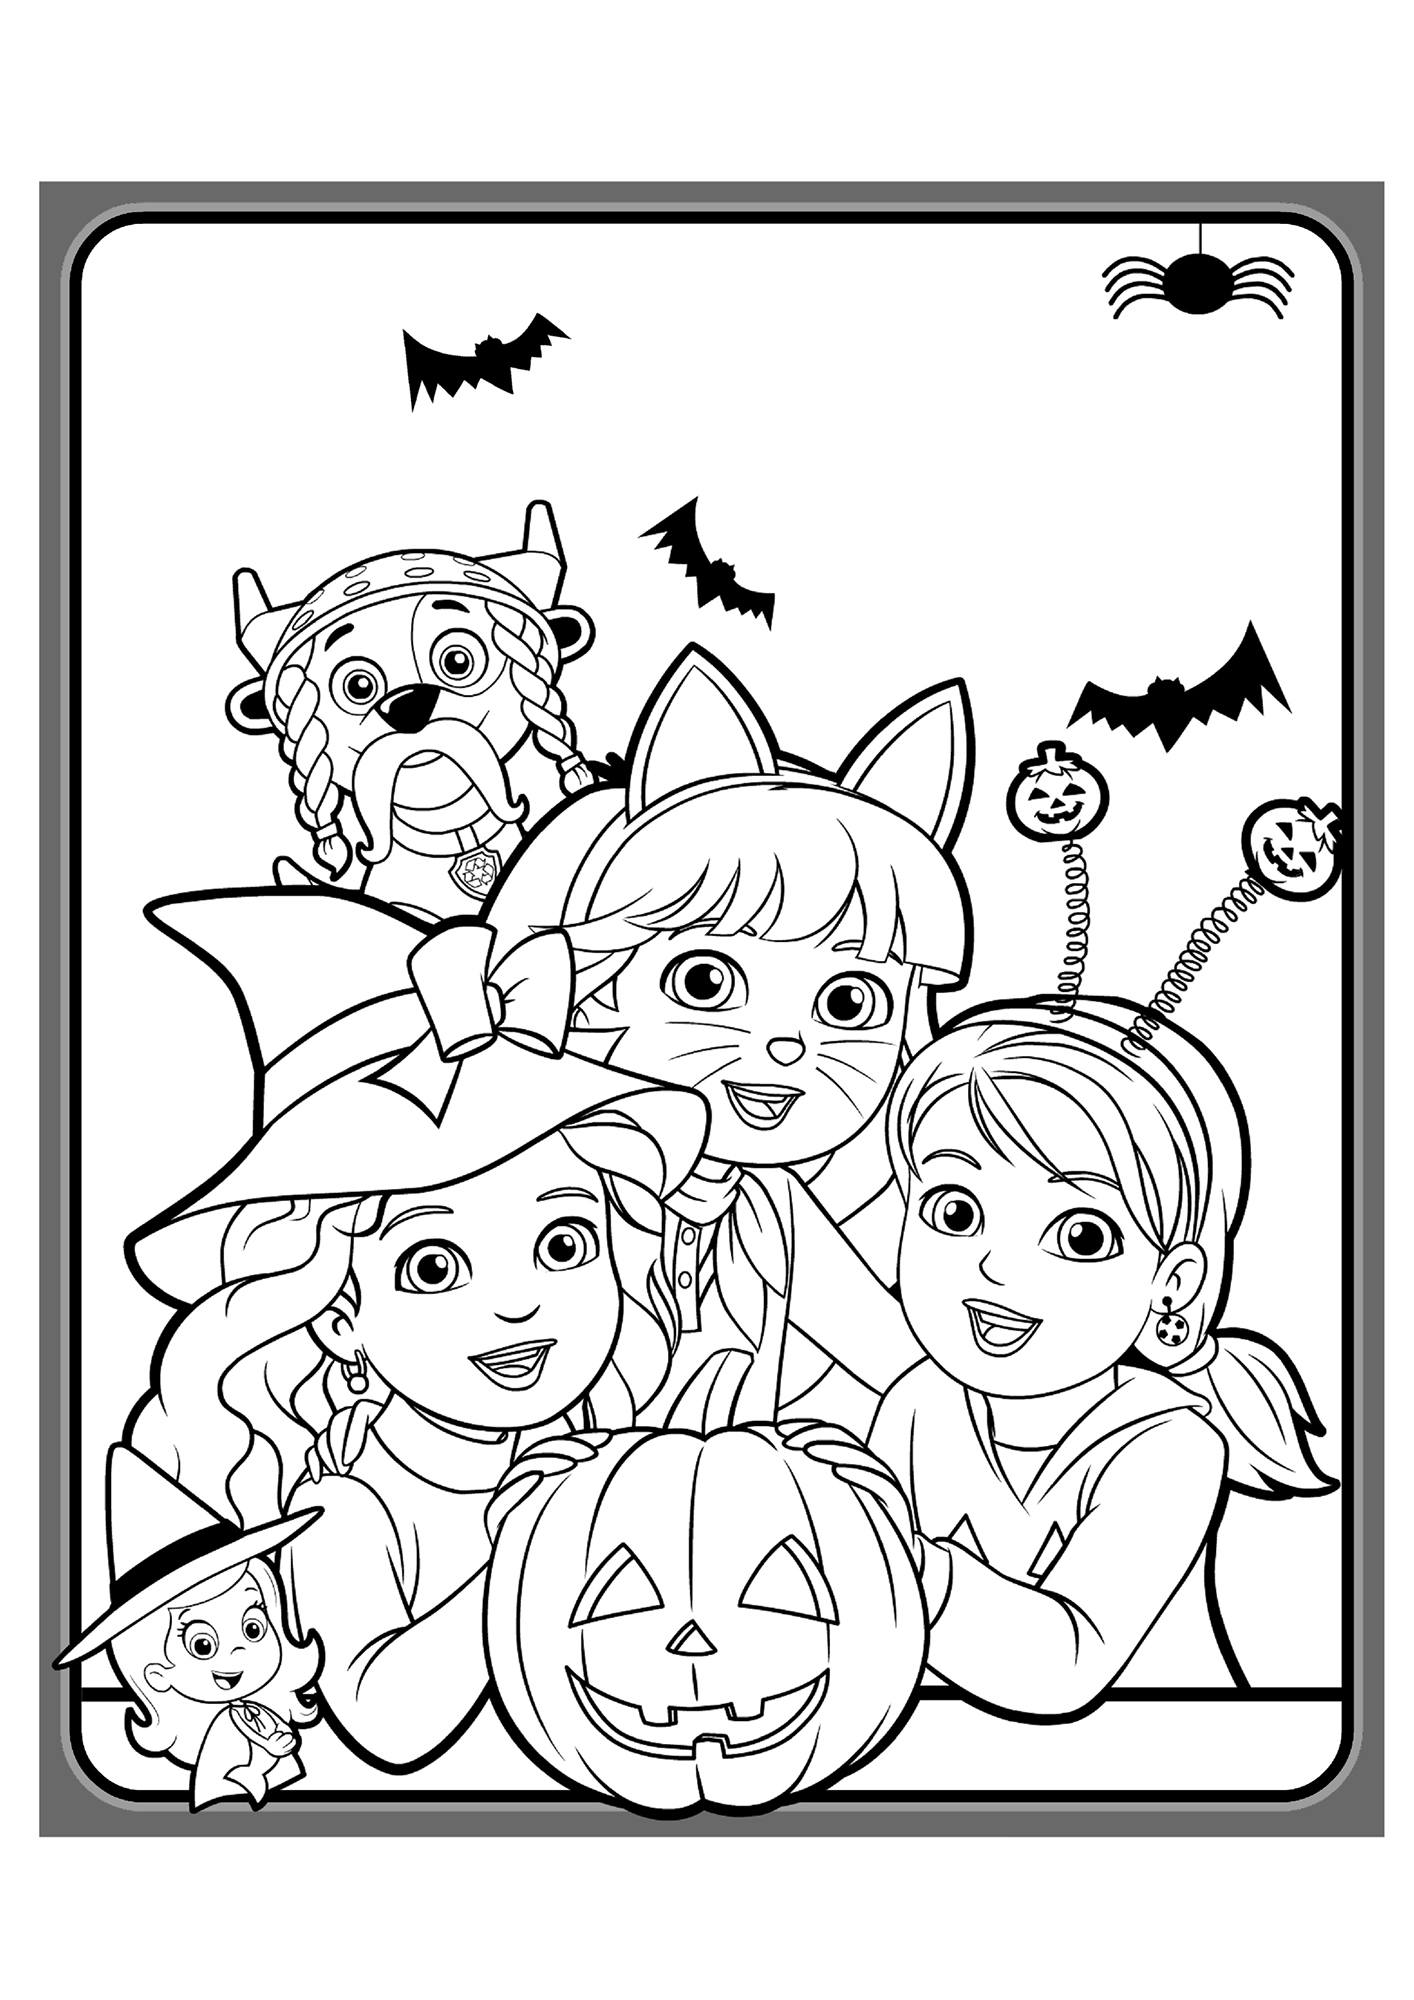 Free Dora and friends coloring pages to print for kids Download print and color